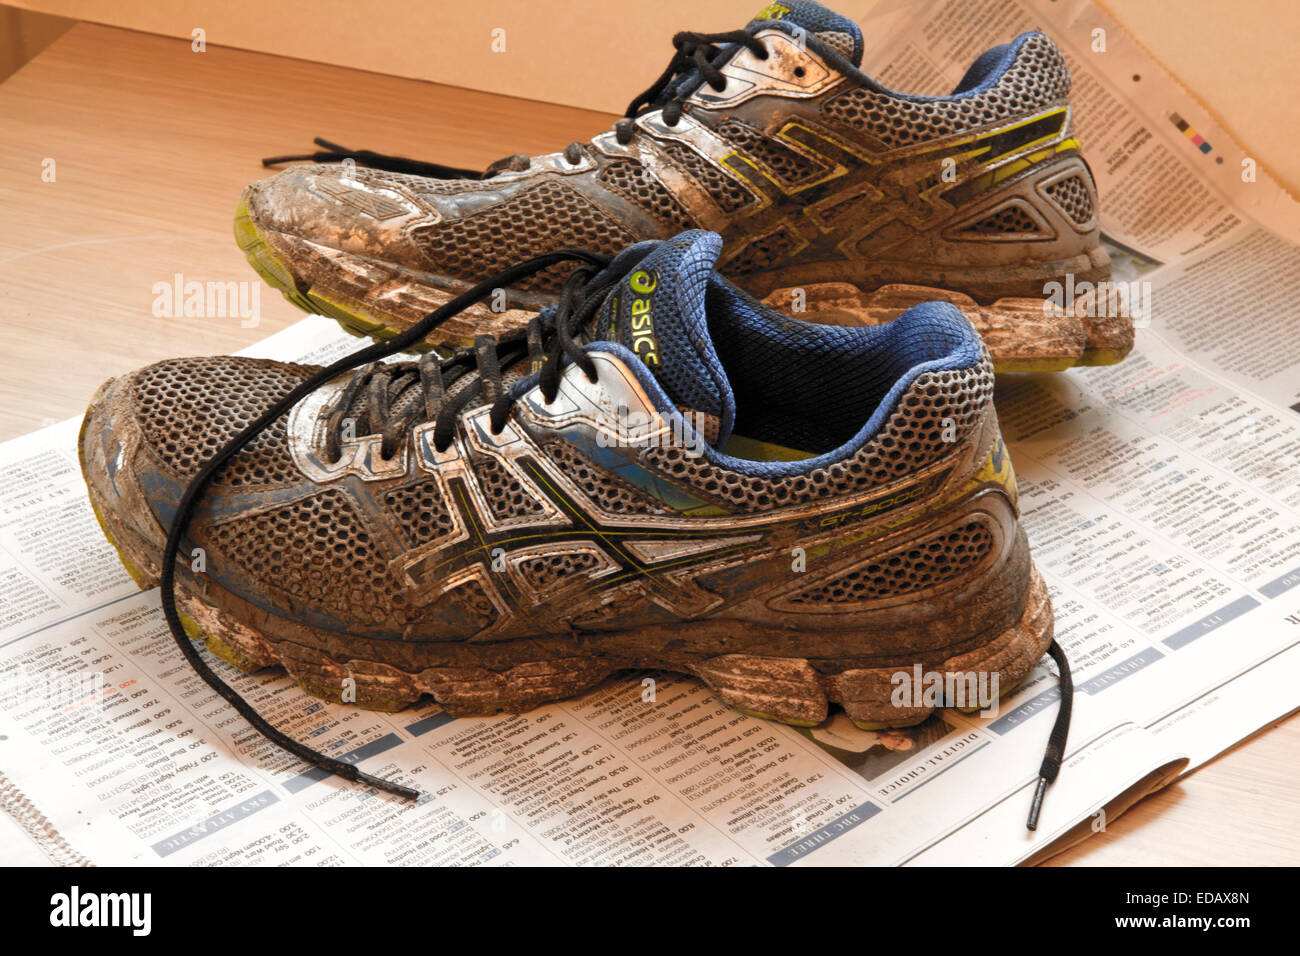 Muddy trainers after a run, on newspaper to protect the floor Stock Photo